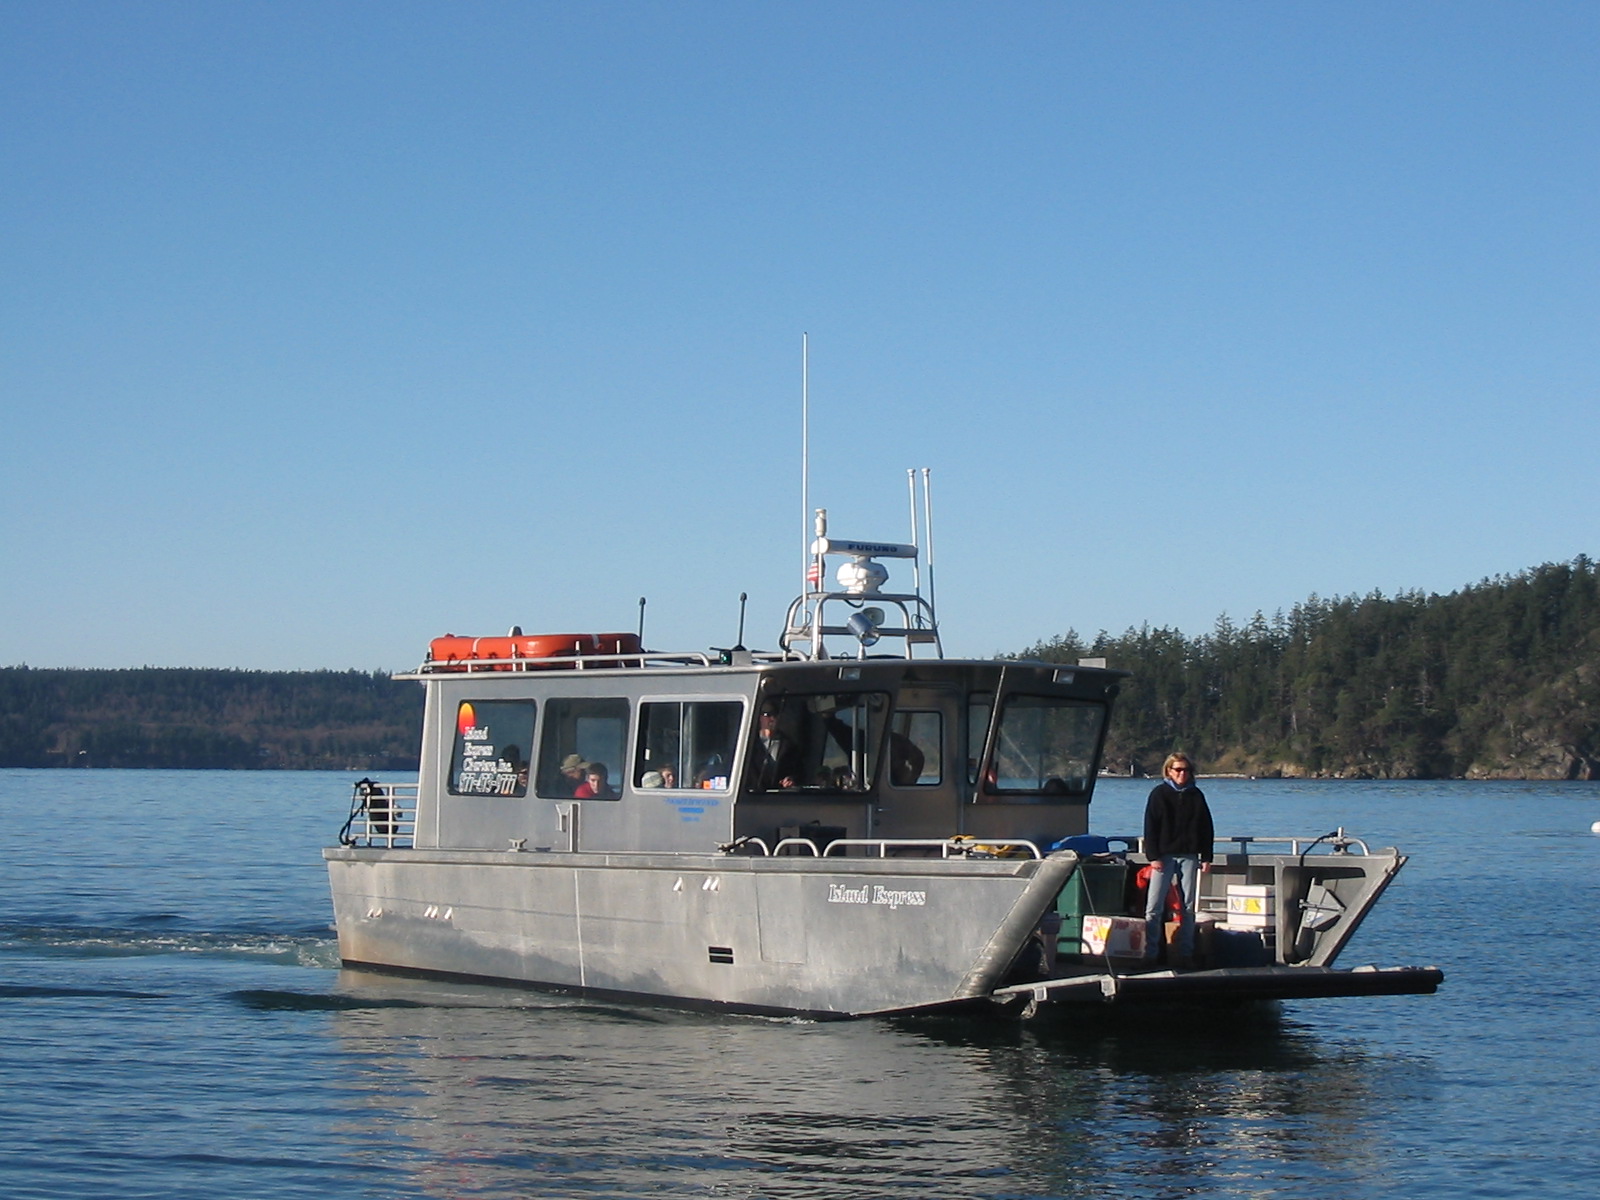 Island Express arriving at Decatur Island